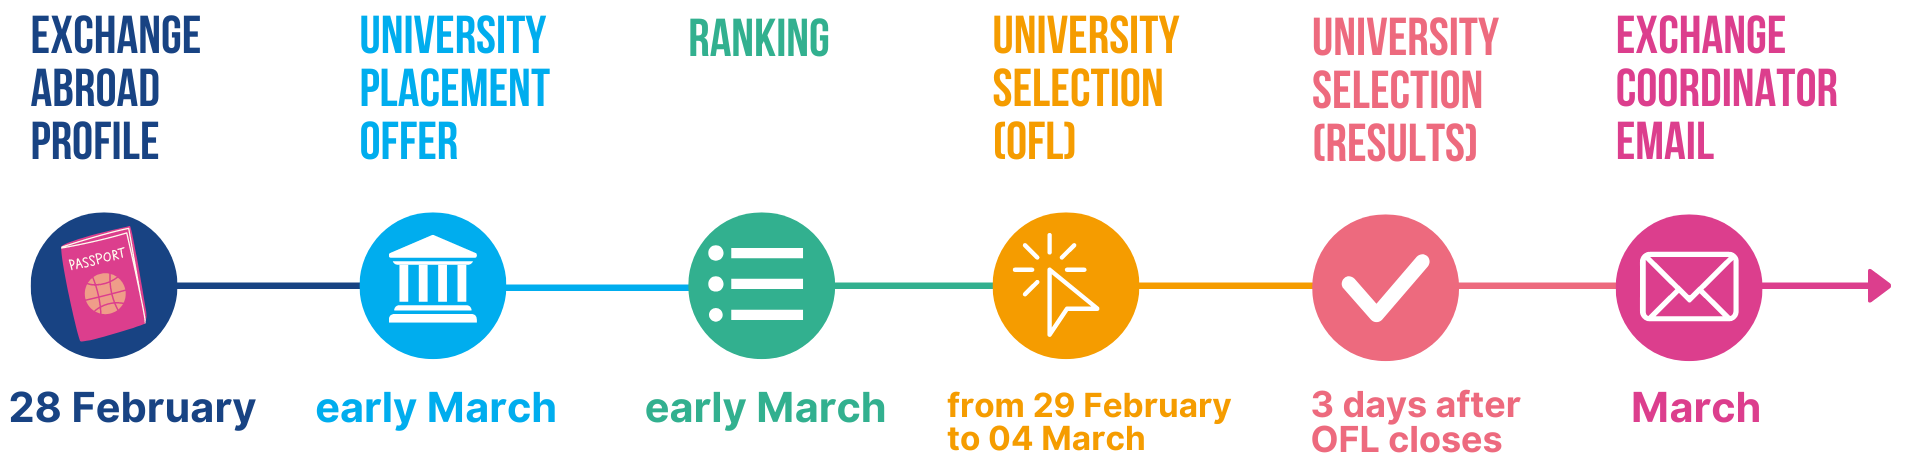 University Selection Timelines (7).png